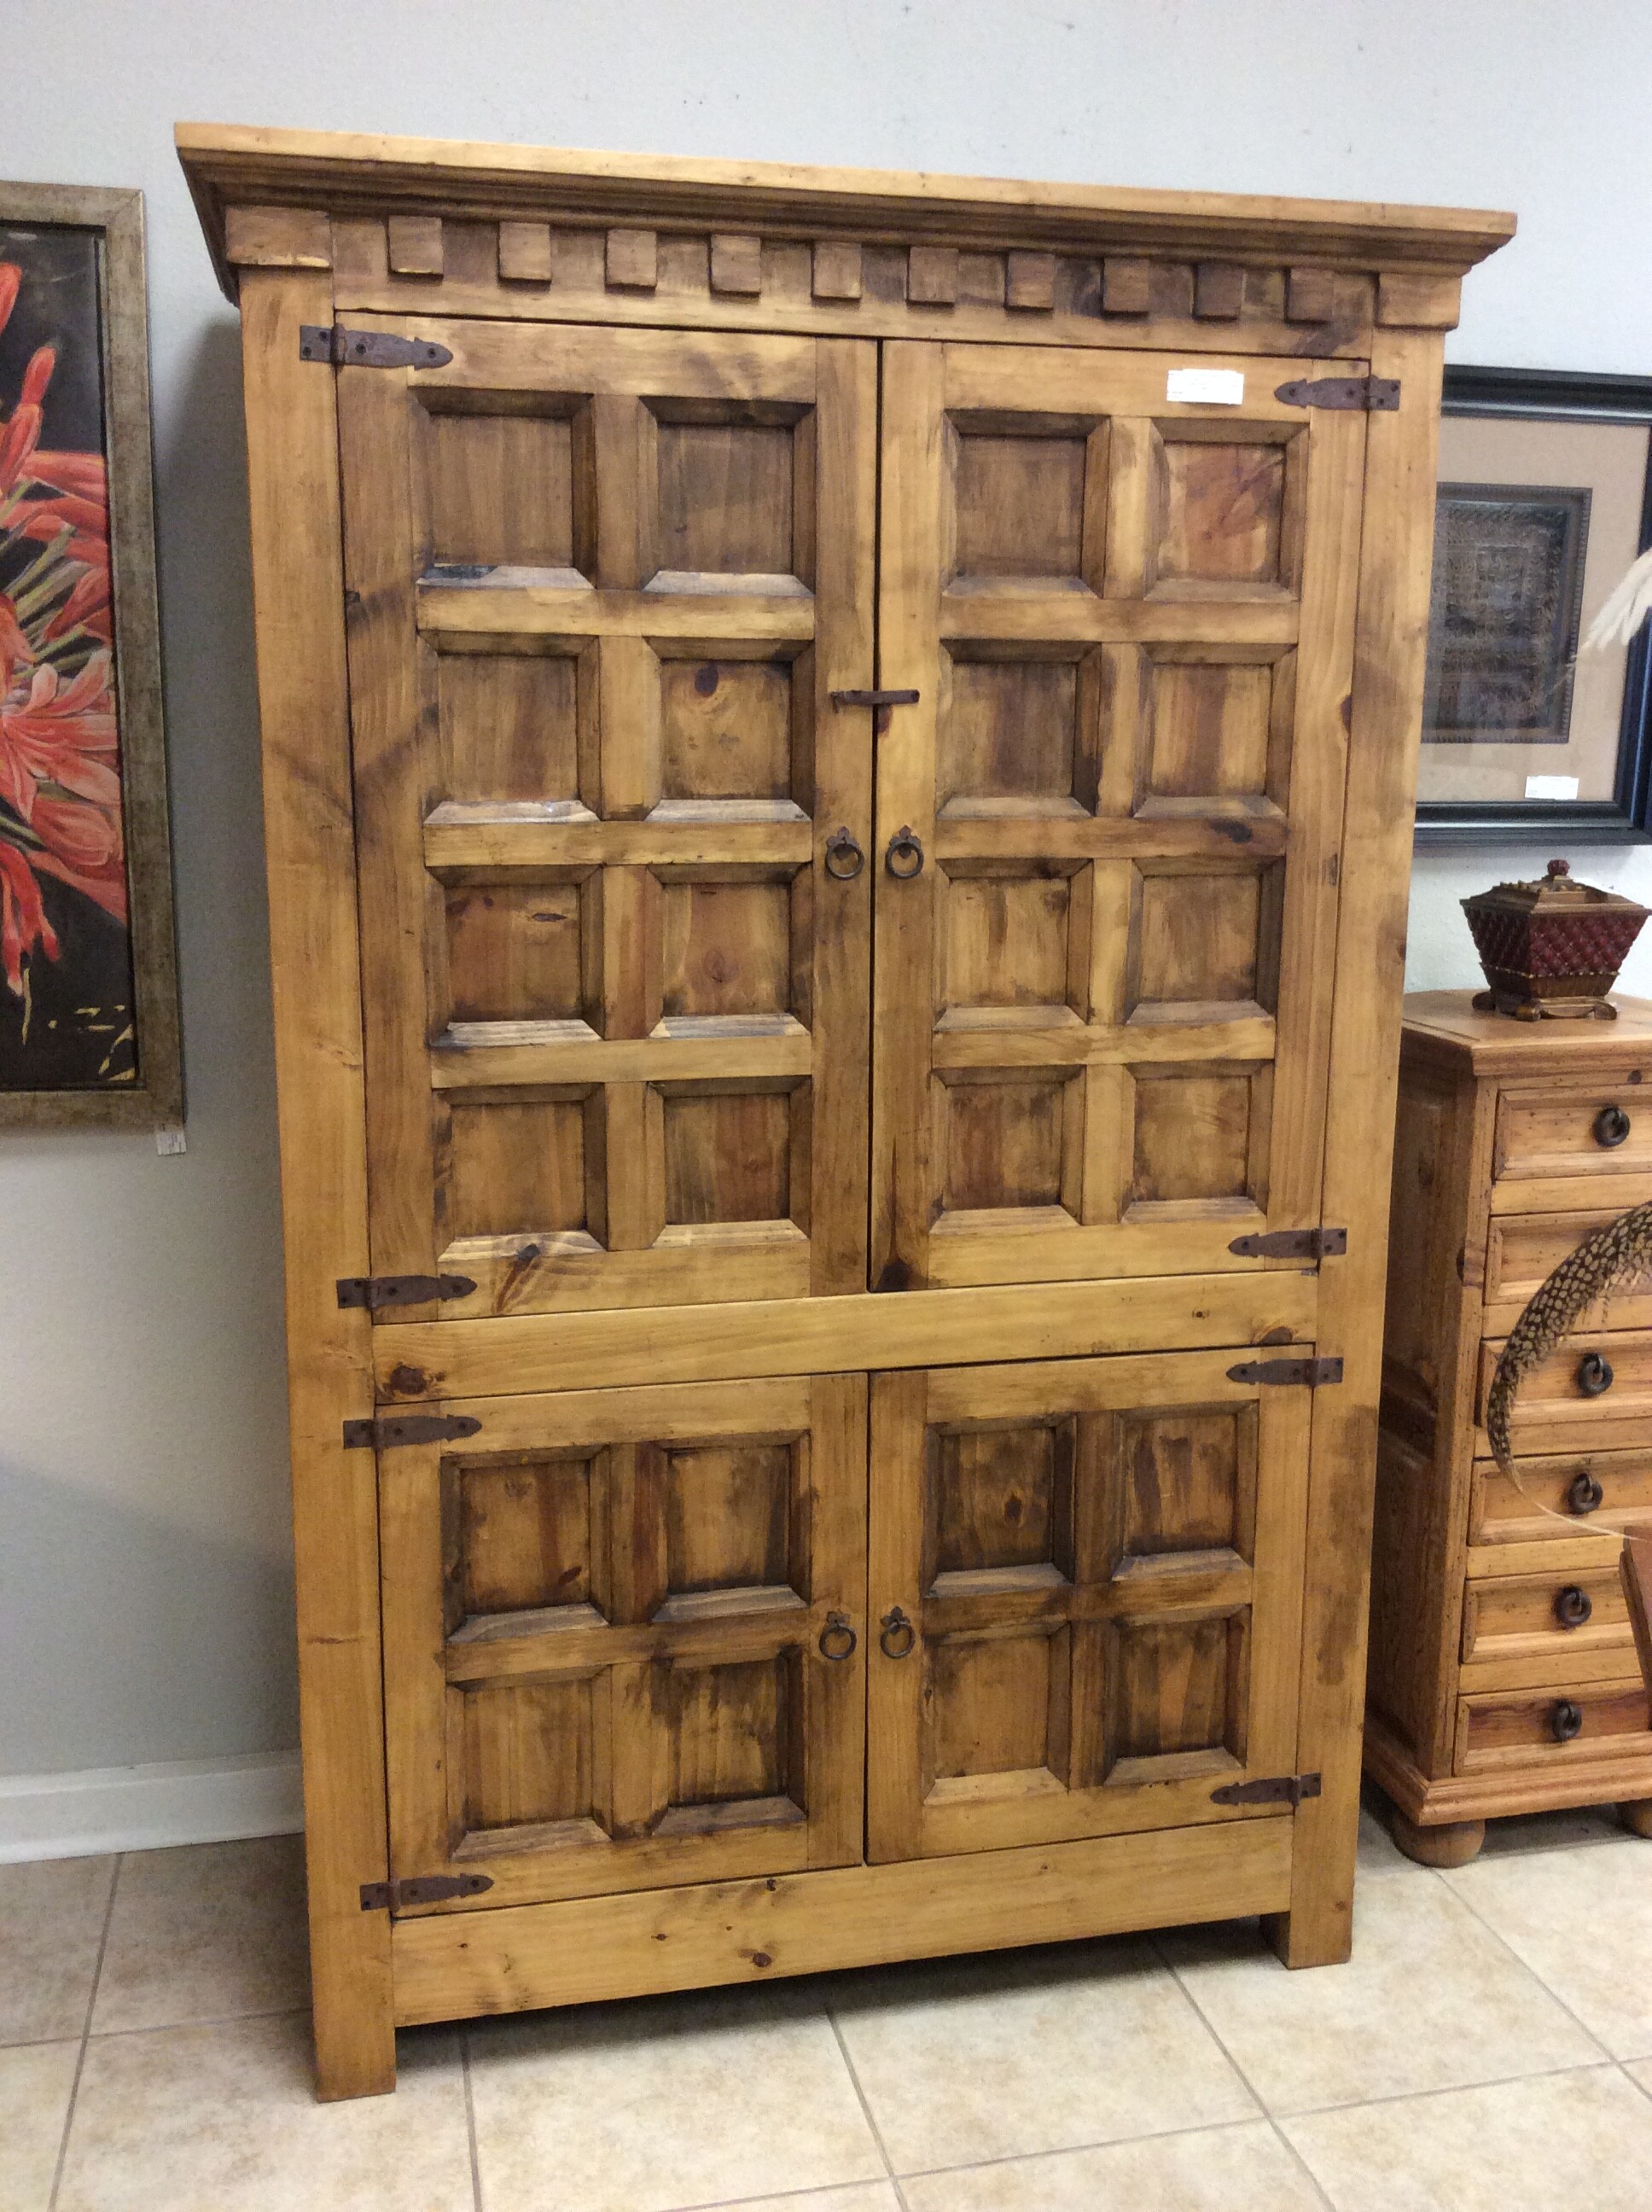 This is a beautiful, rustic armior with 2 cabinets that include shelfs.